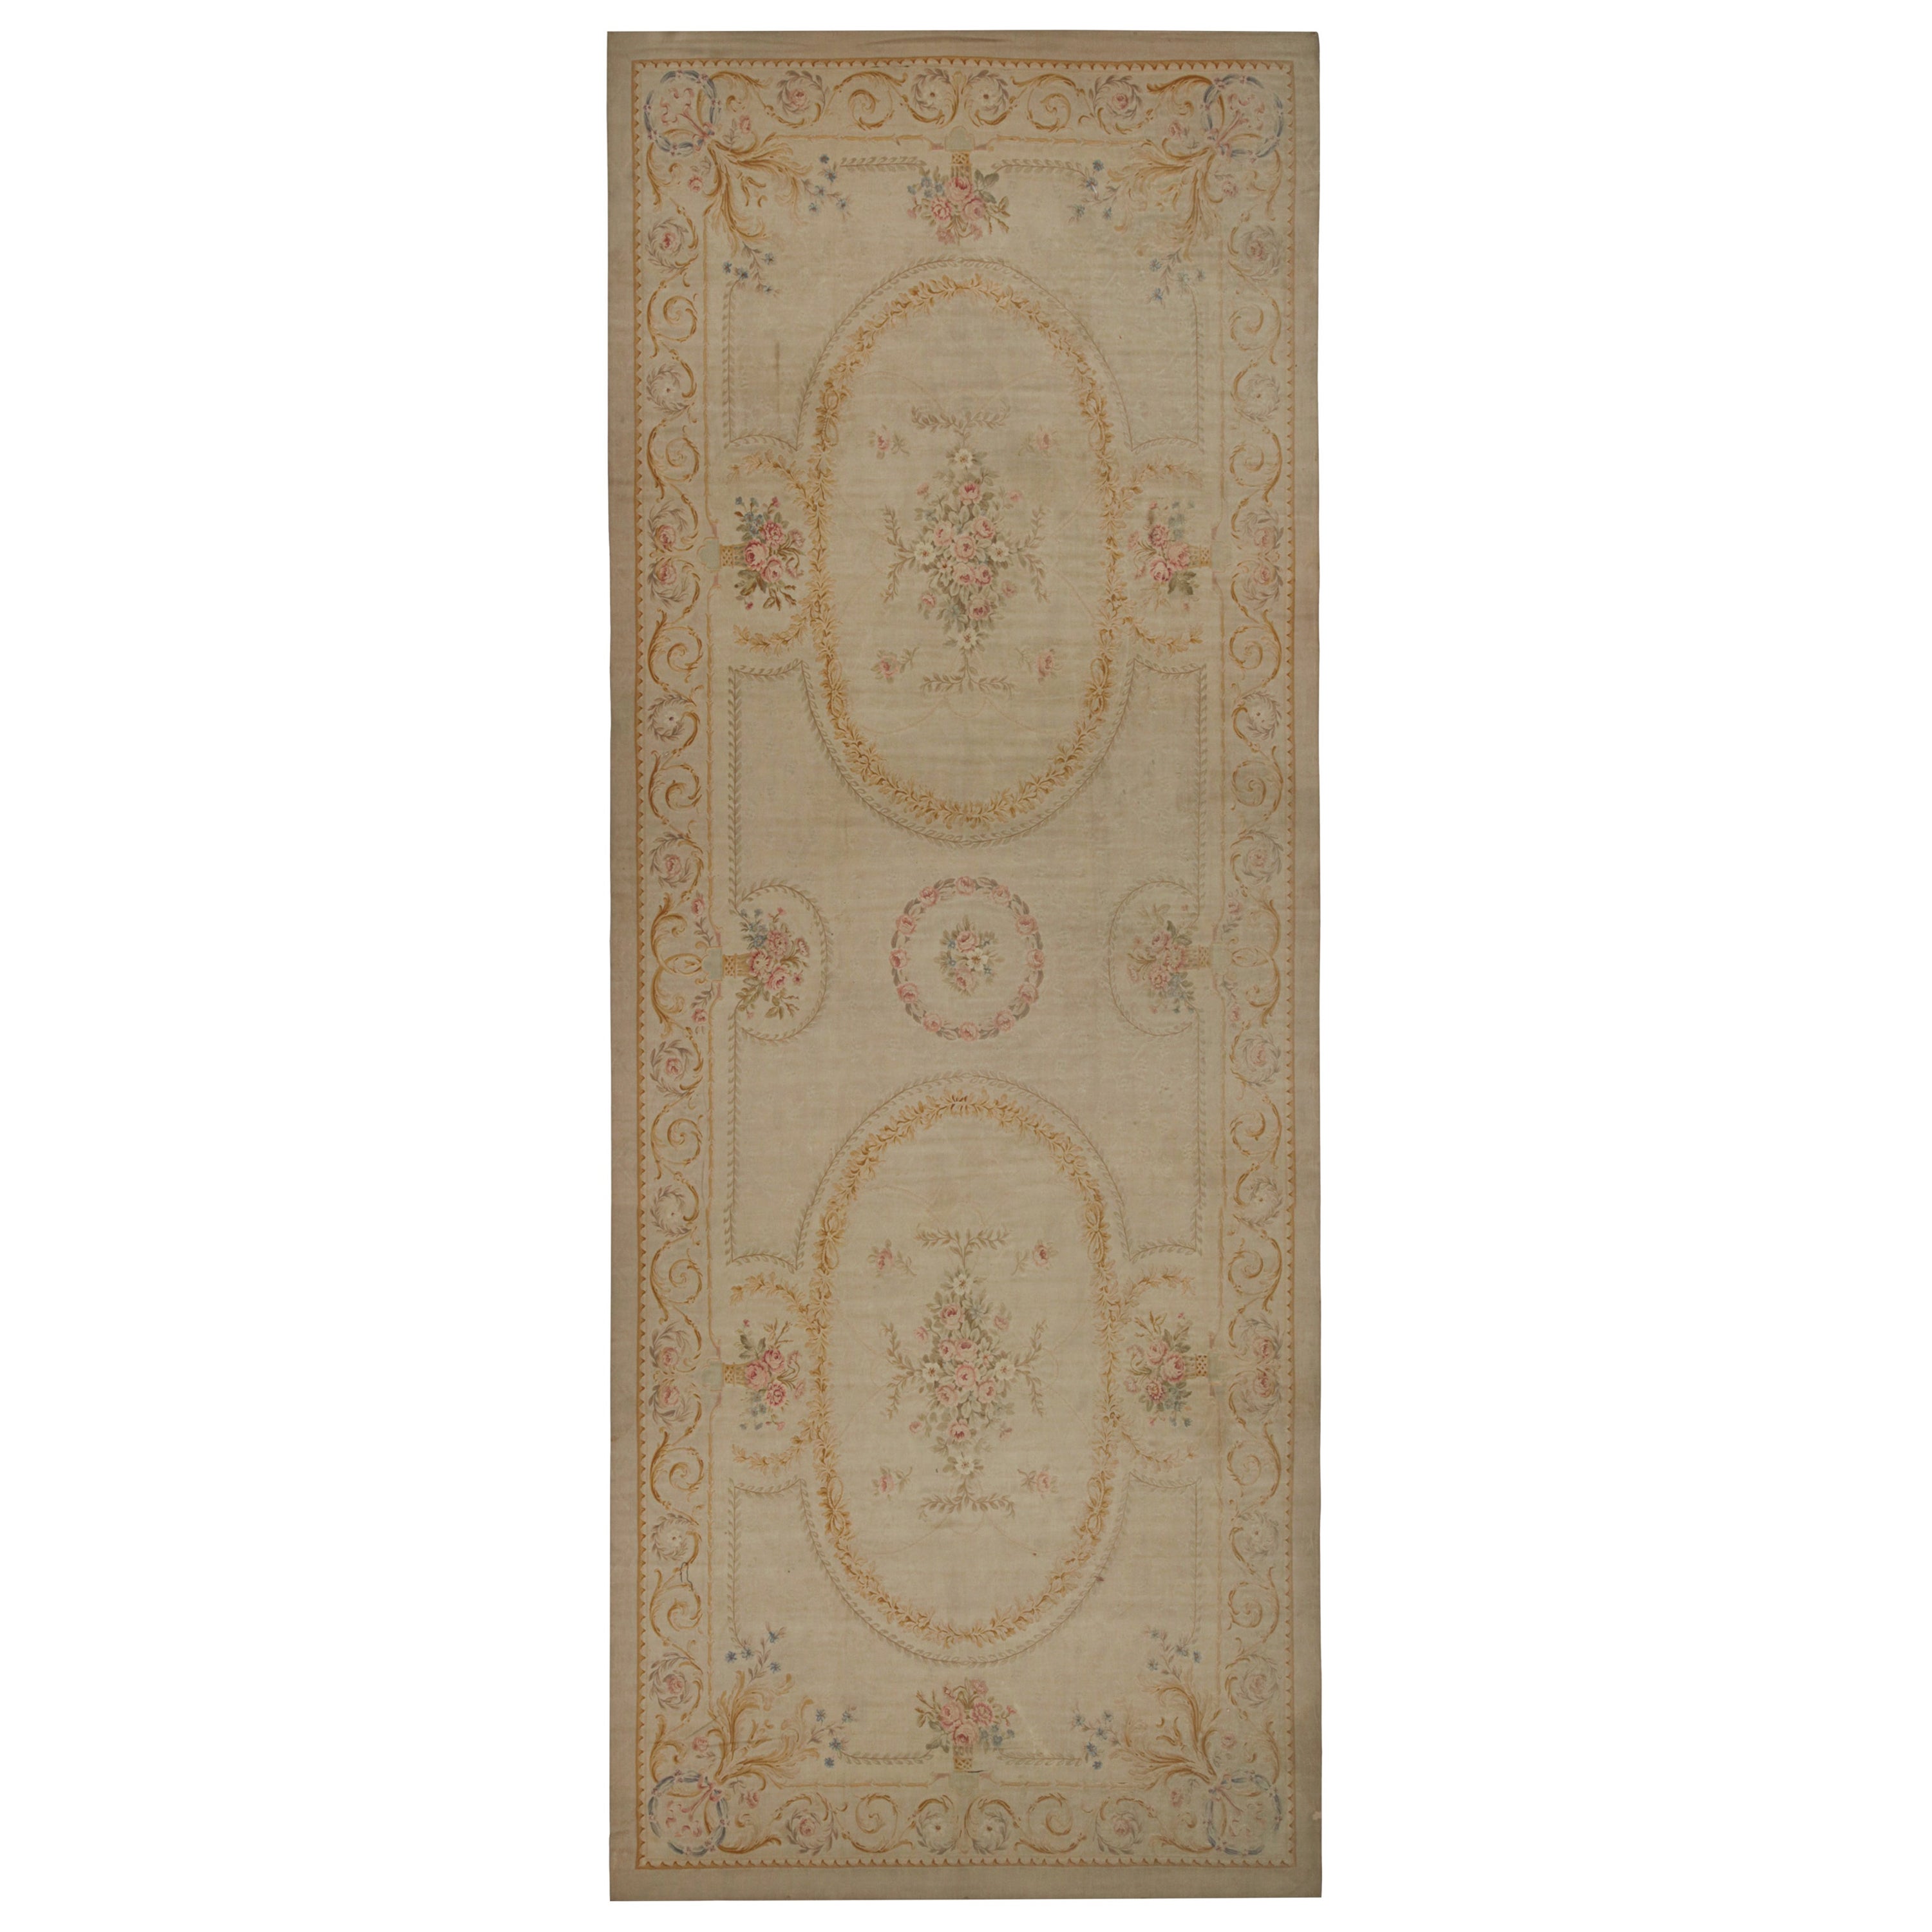 Antique Oversized Aubusson Flatweave Runner in Taupe